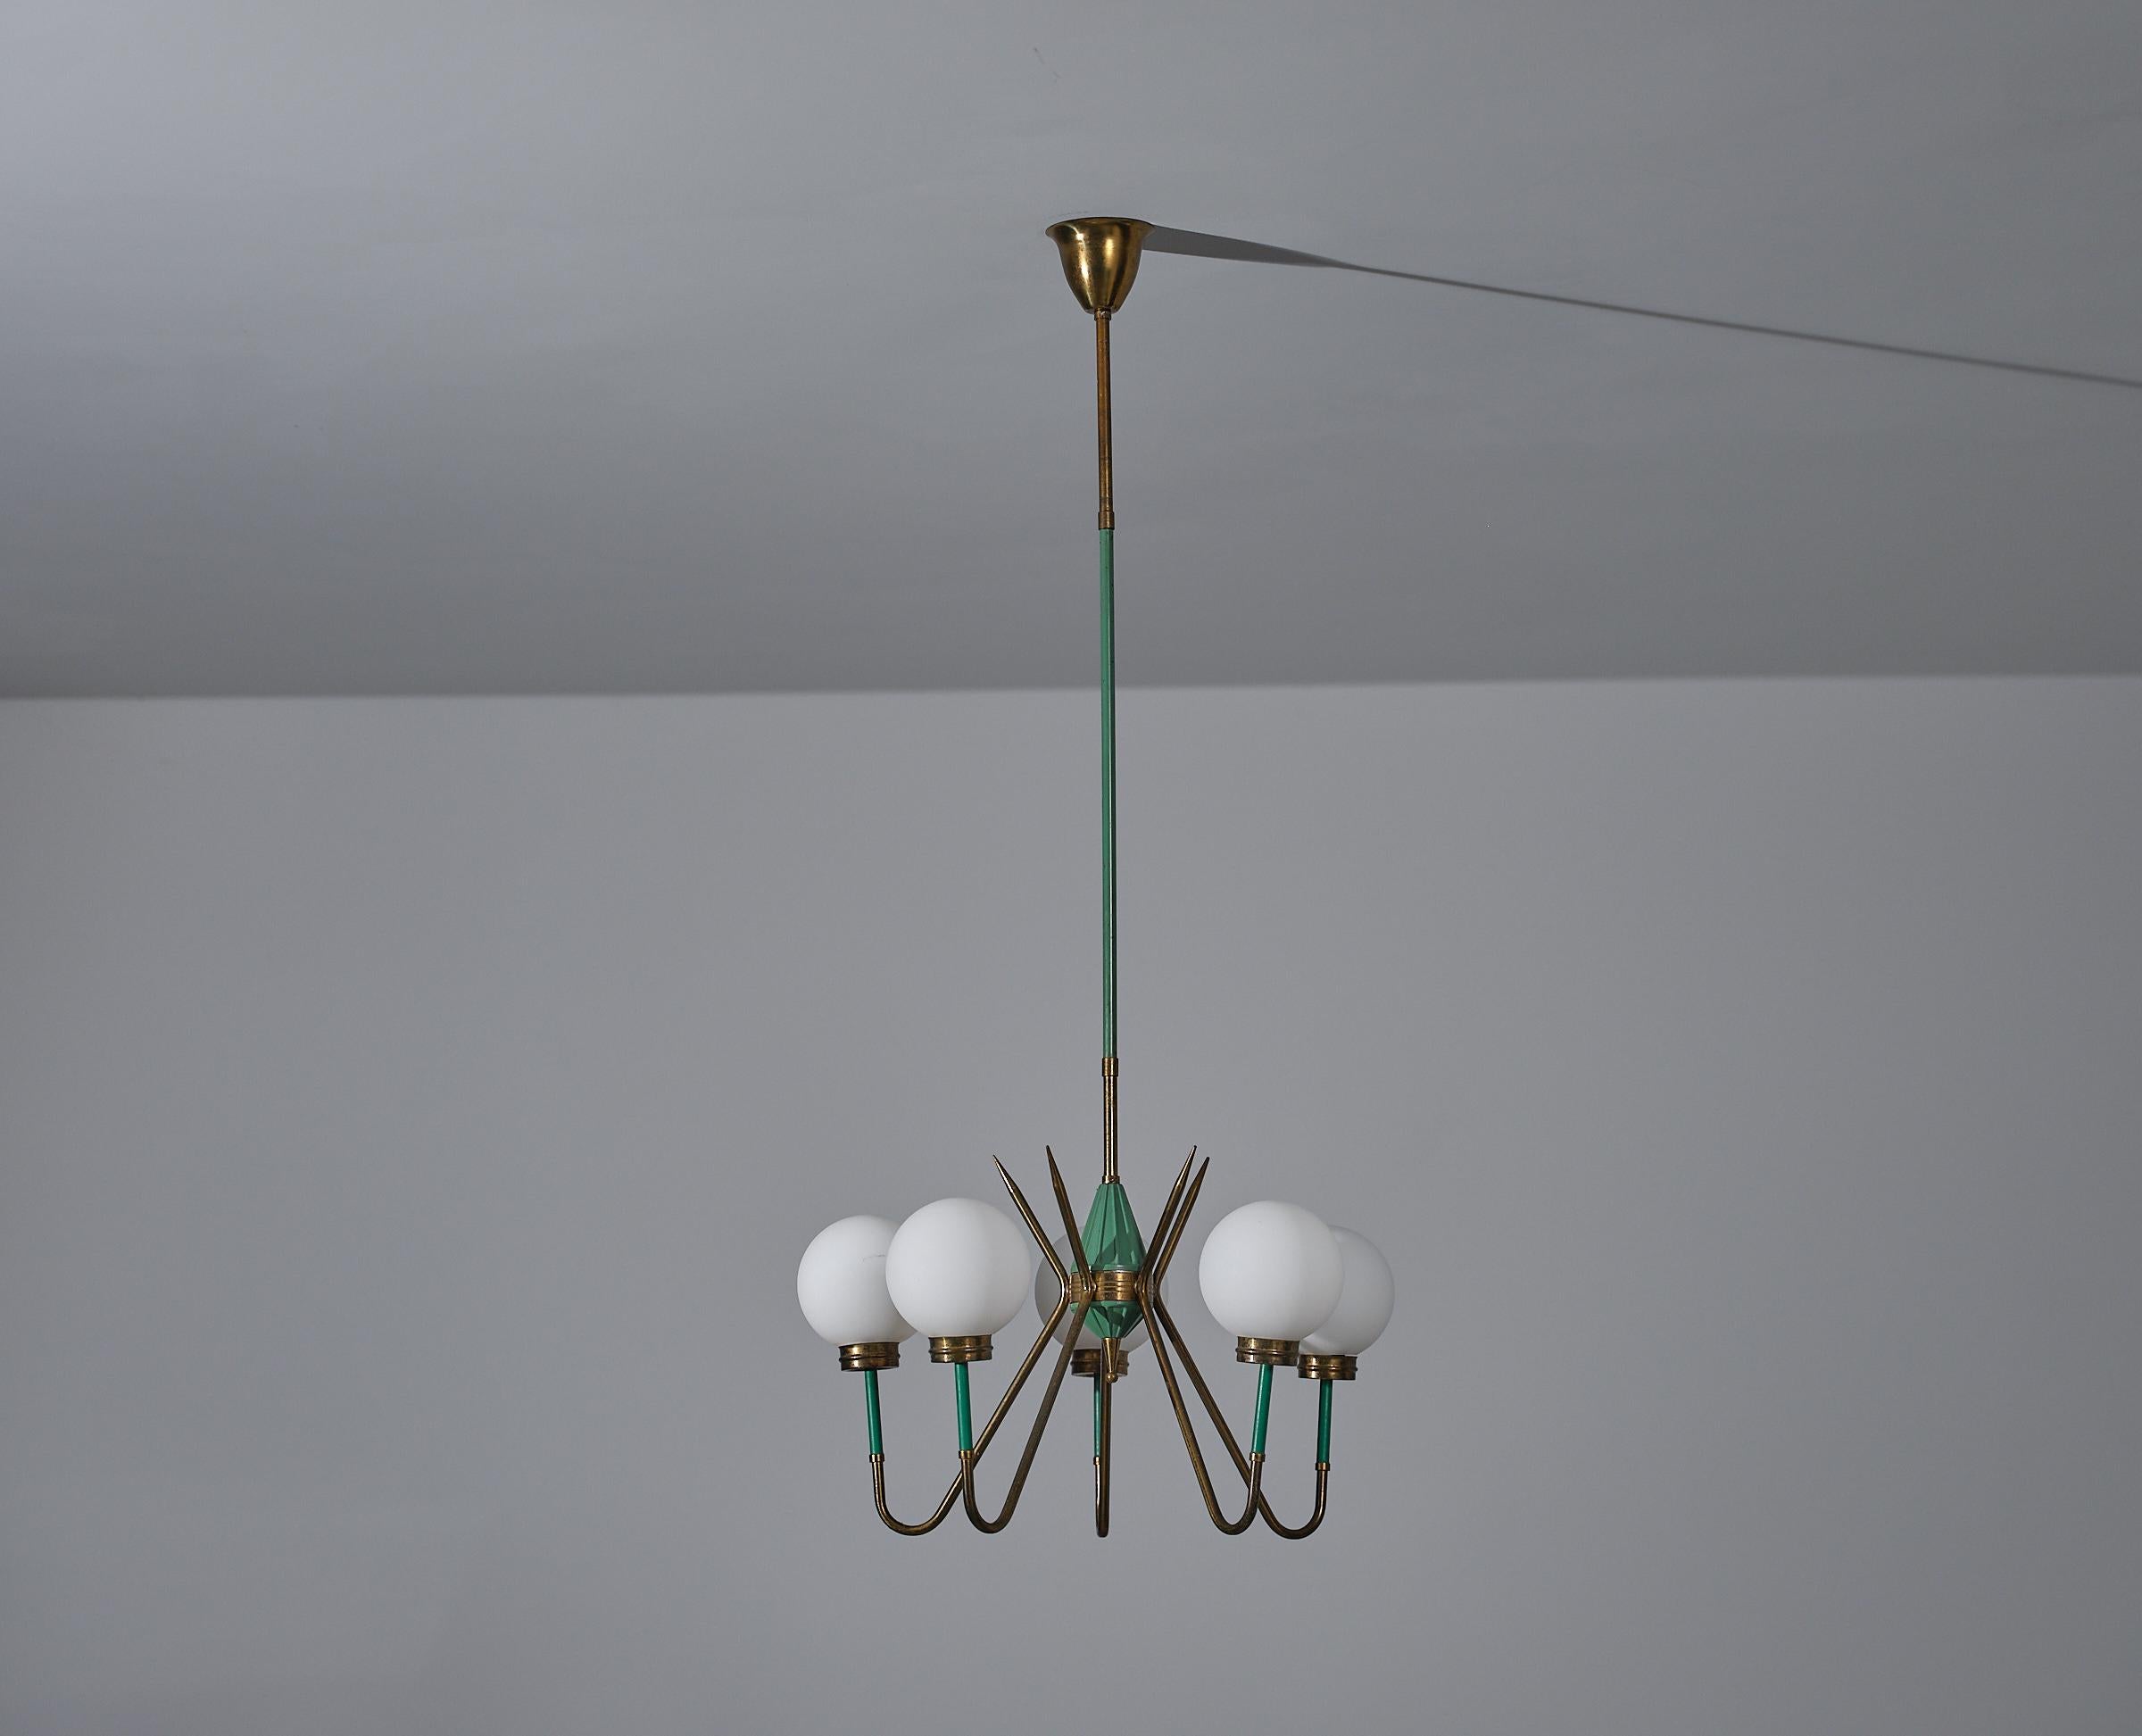 Presenting the refined charm of this 1950s Italian design 5-light chandelier. This elegant piece embodies the essence of mid-century modernity, featuring a sophisticated structure with 5 opaline glass diffusers that radiate a soft and precious